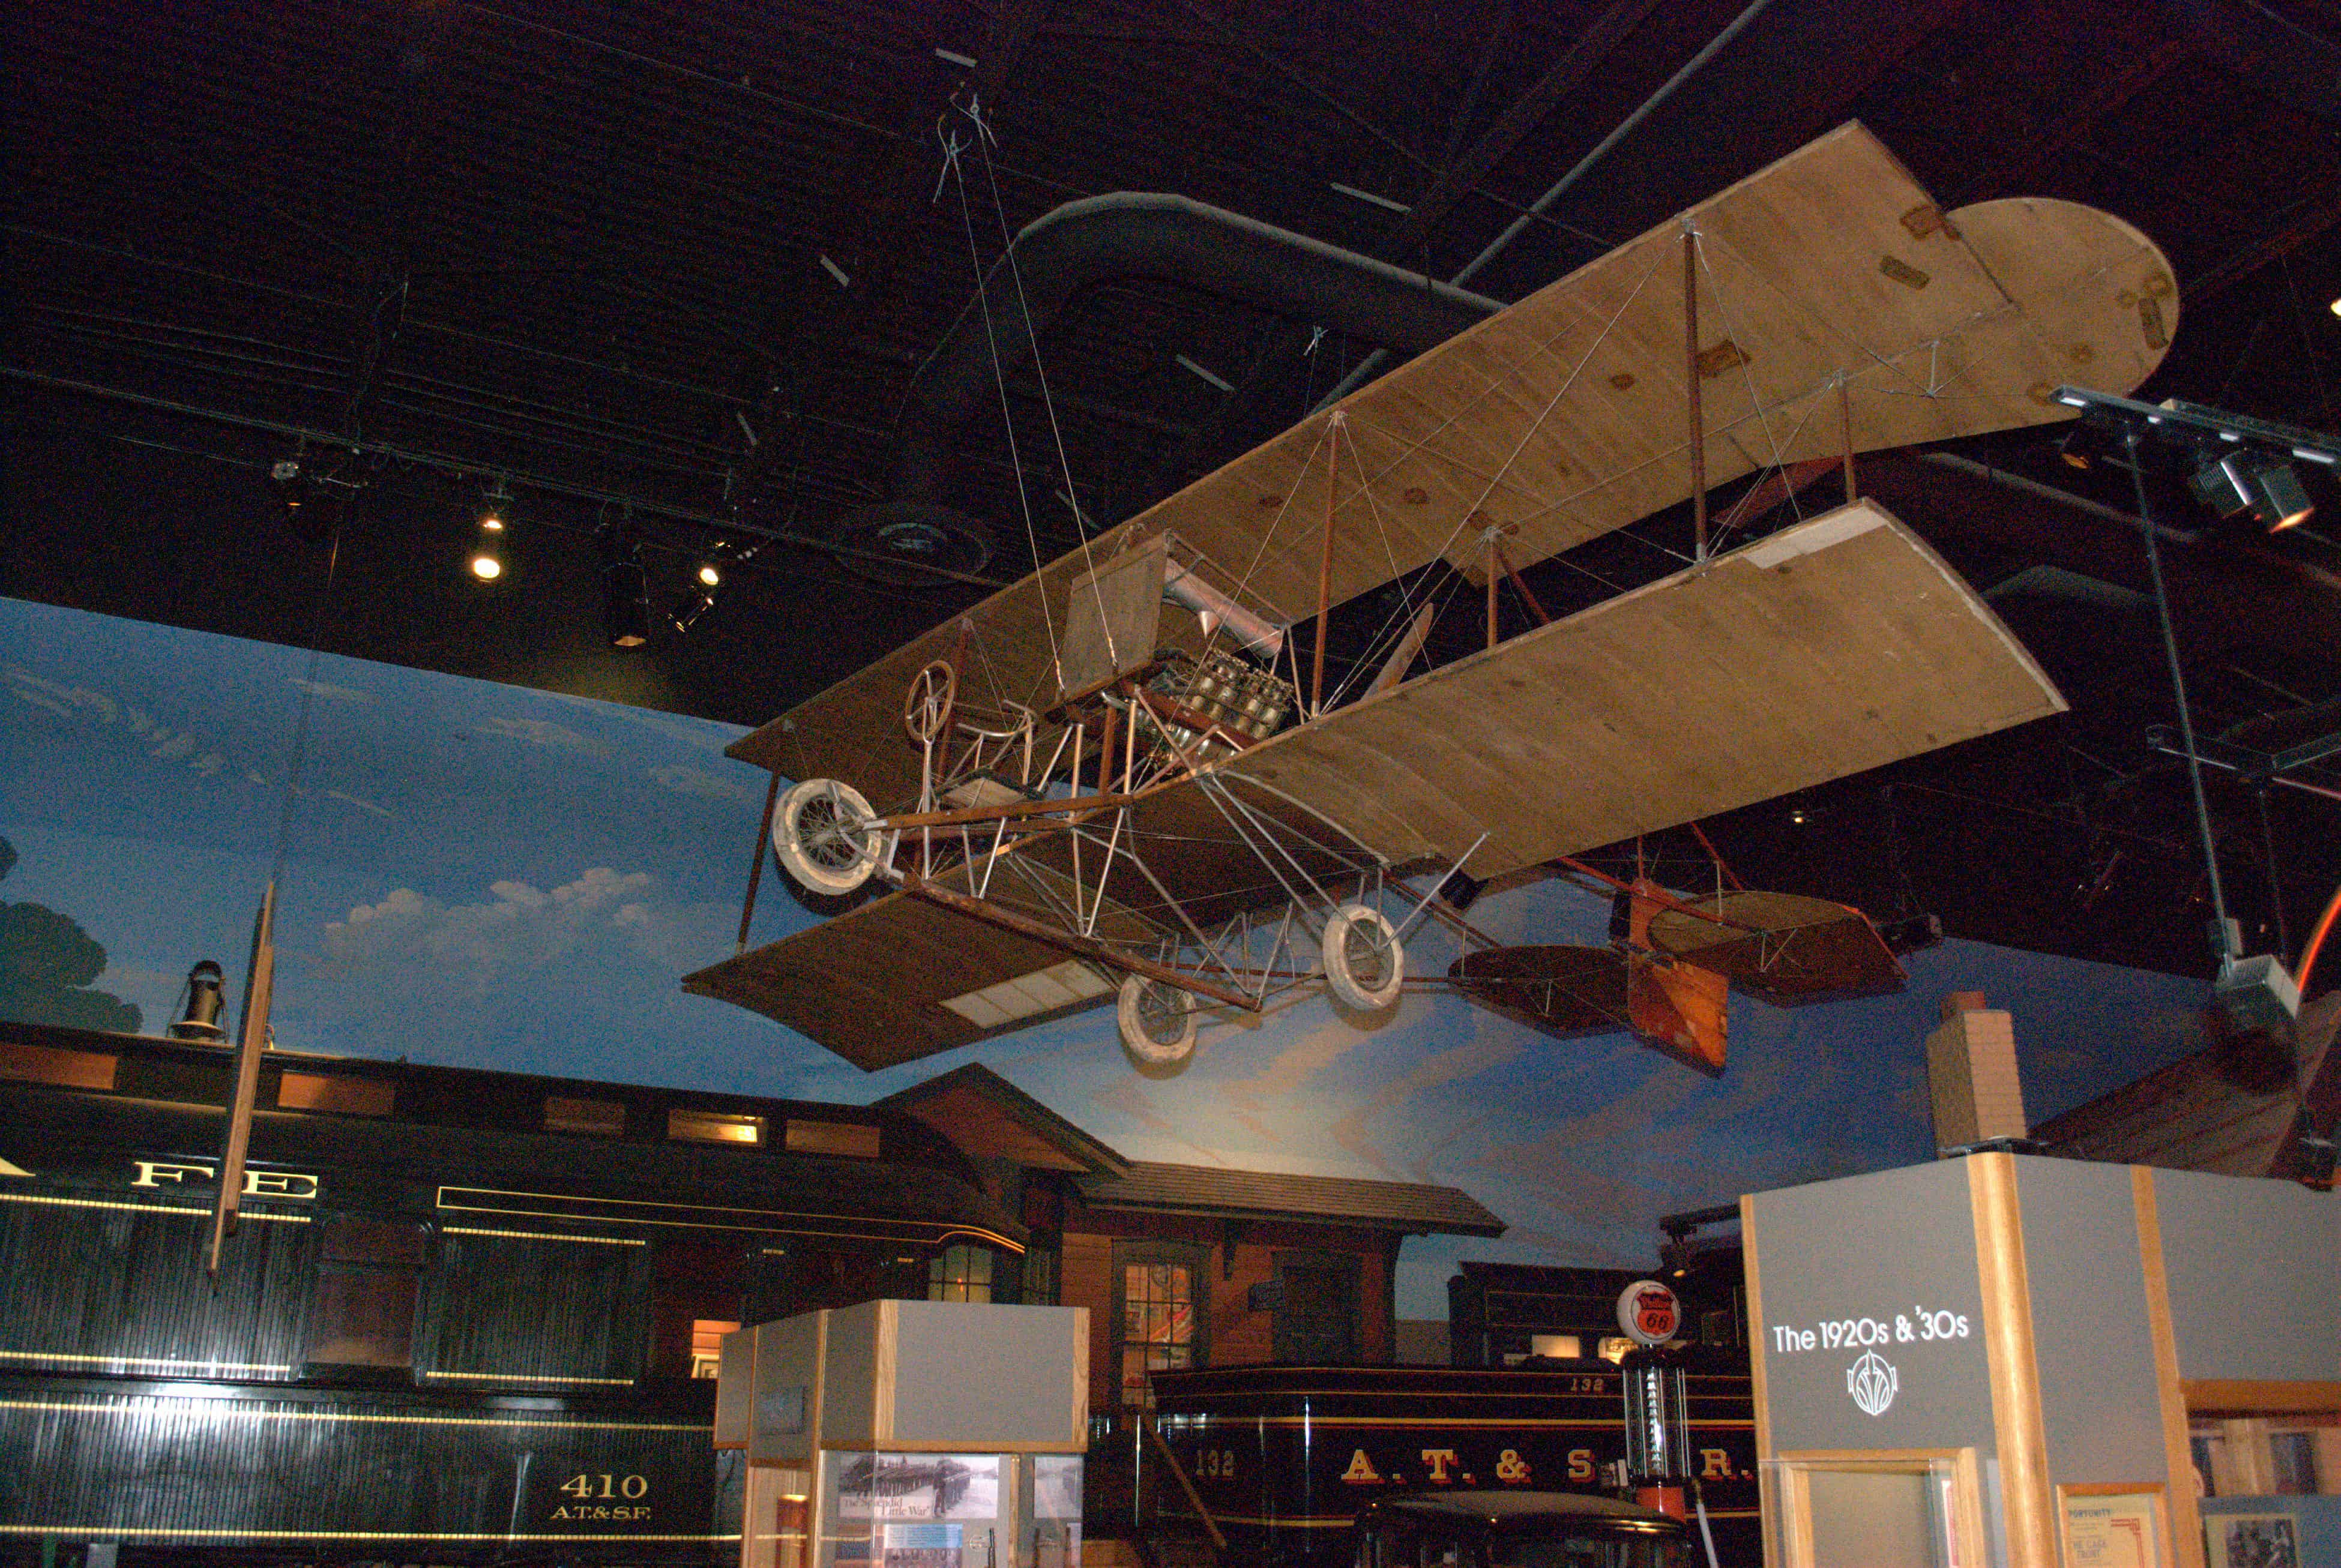 An early airplane and a steam locomotive are on display at the Kansas Museum of History.